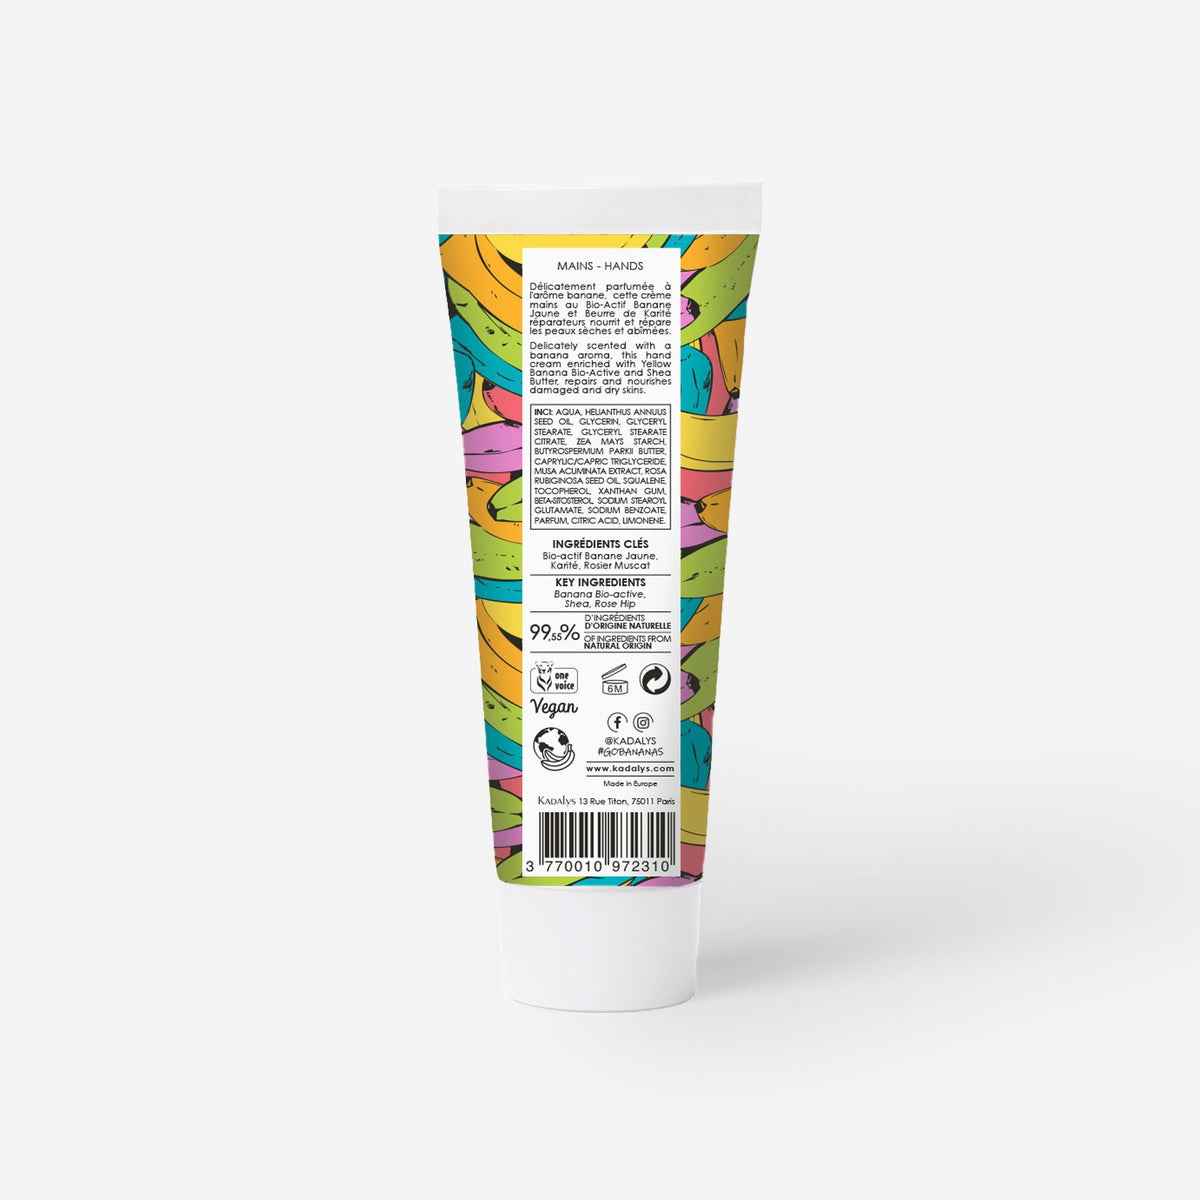 Hand cream and shea butter hand treatment to provide intense moisture